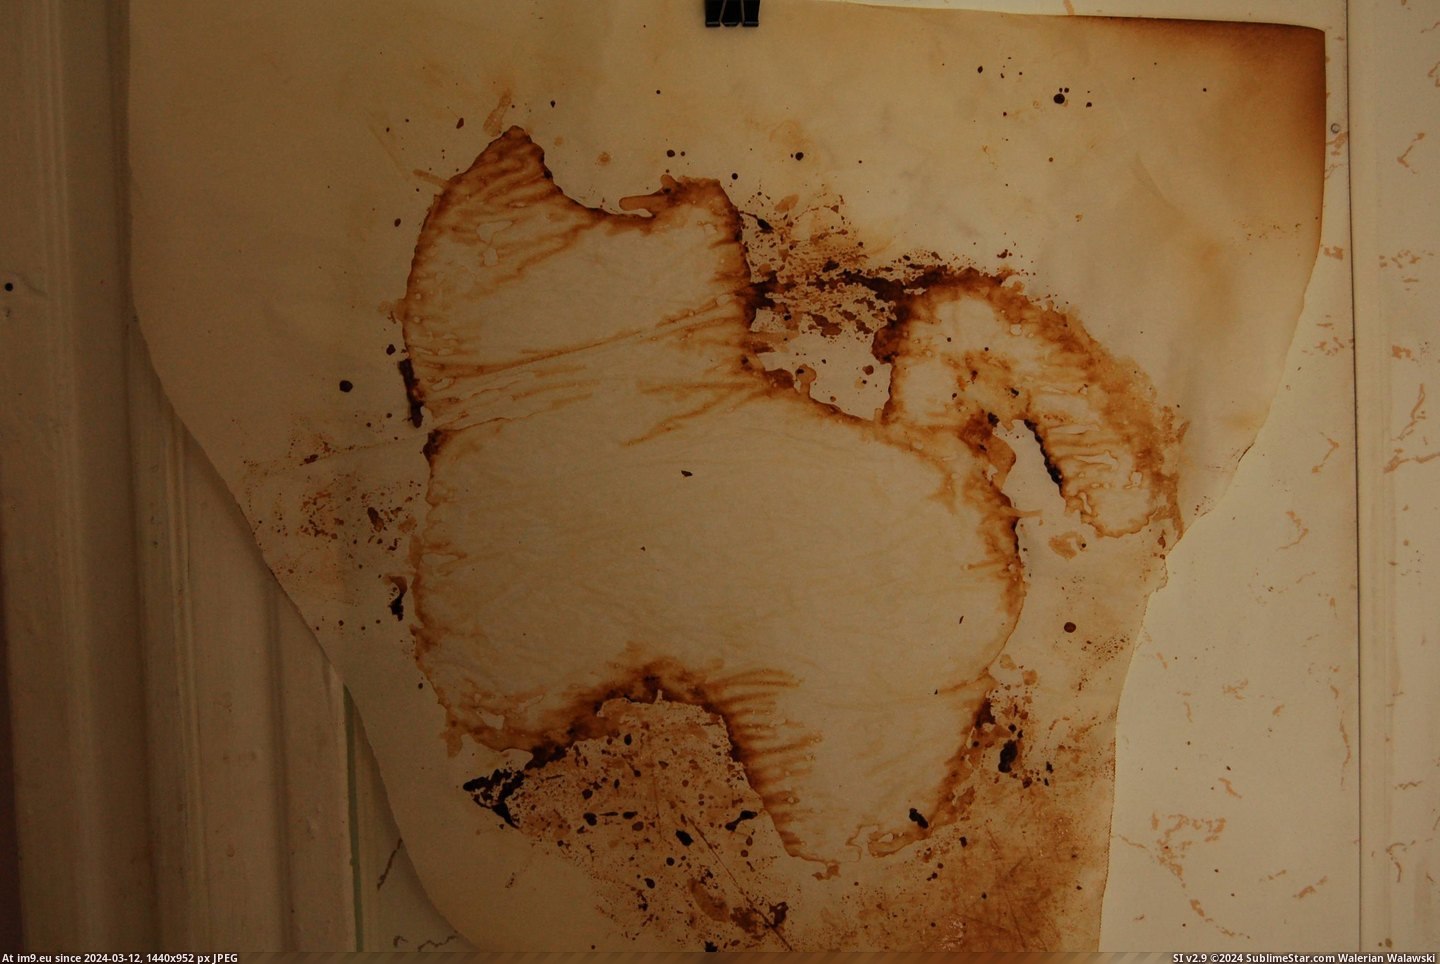 #Cat #Painting #Roommate #Cave #Cooked #Parchment #Paper #Pizza #Shaped [Mildlyinteresting] My roommate cooked a cat shaped pizza, the parchment paper he cooked it on now looks like a cave painting of Pic. (Изображение из альбом My r/MILDLYINTERESTING favs))